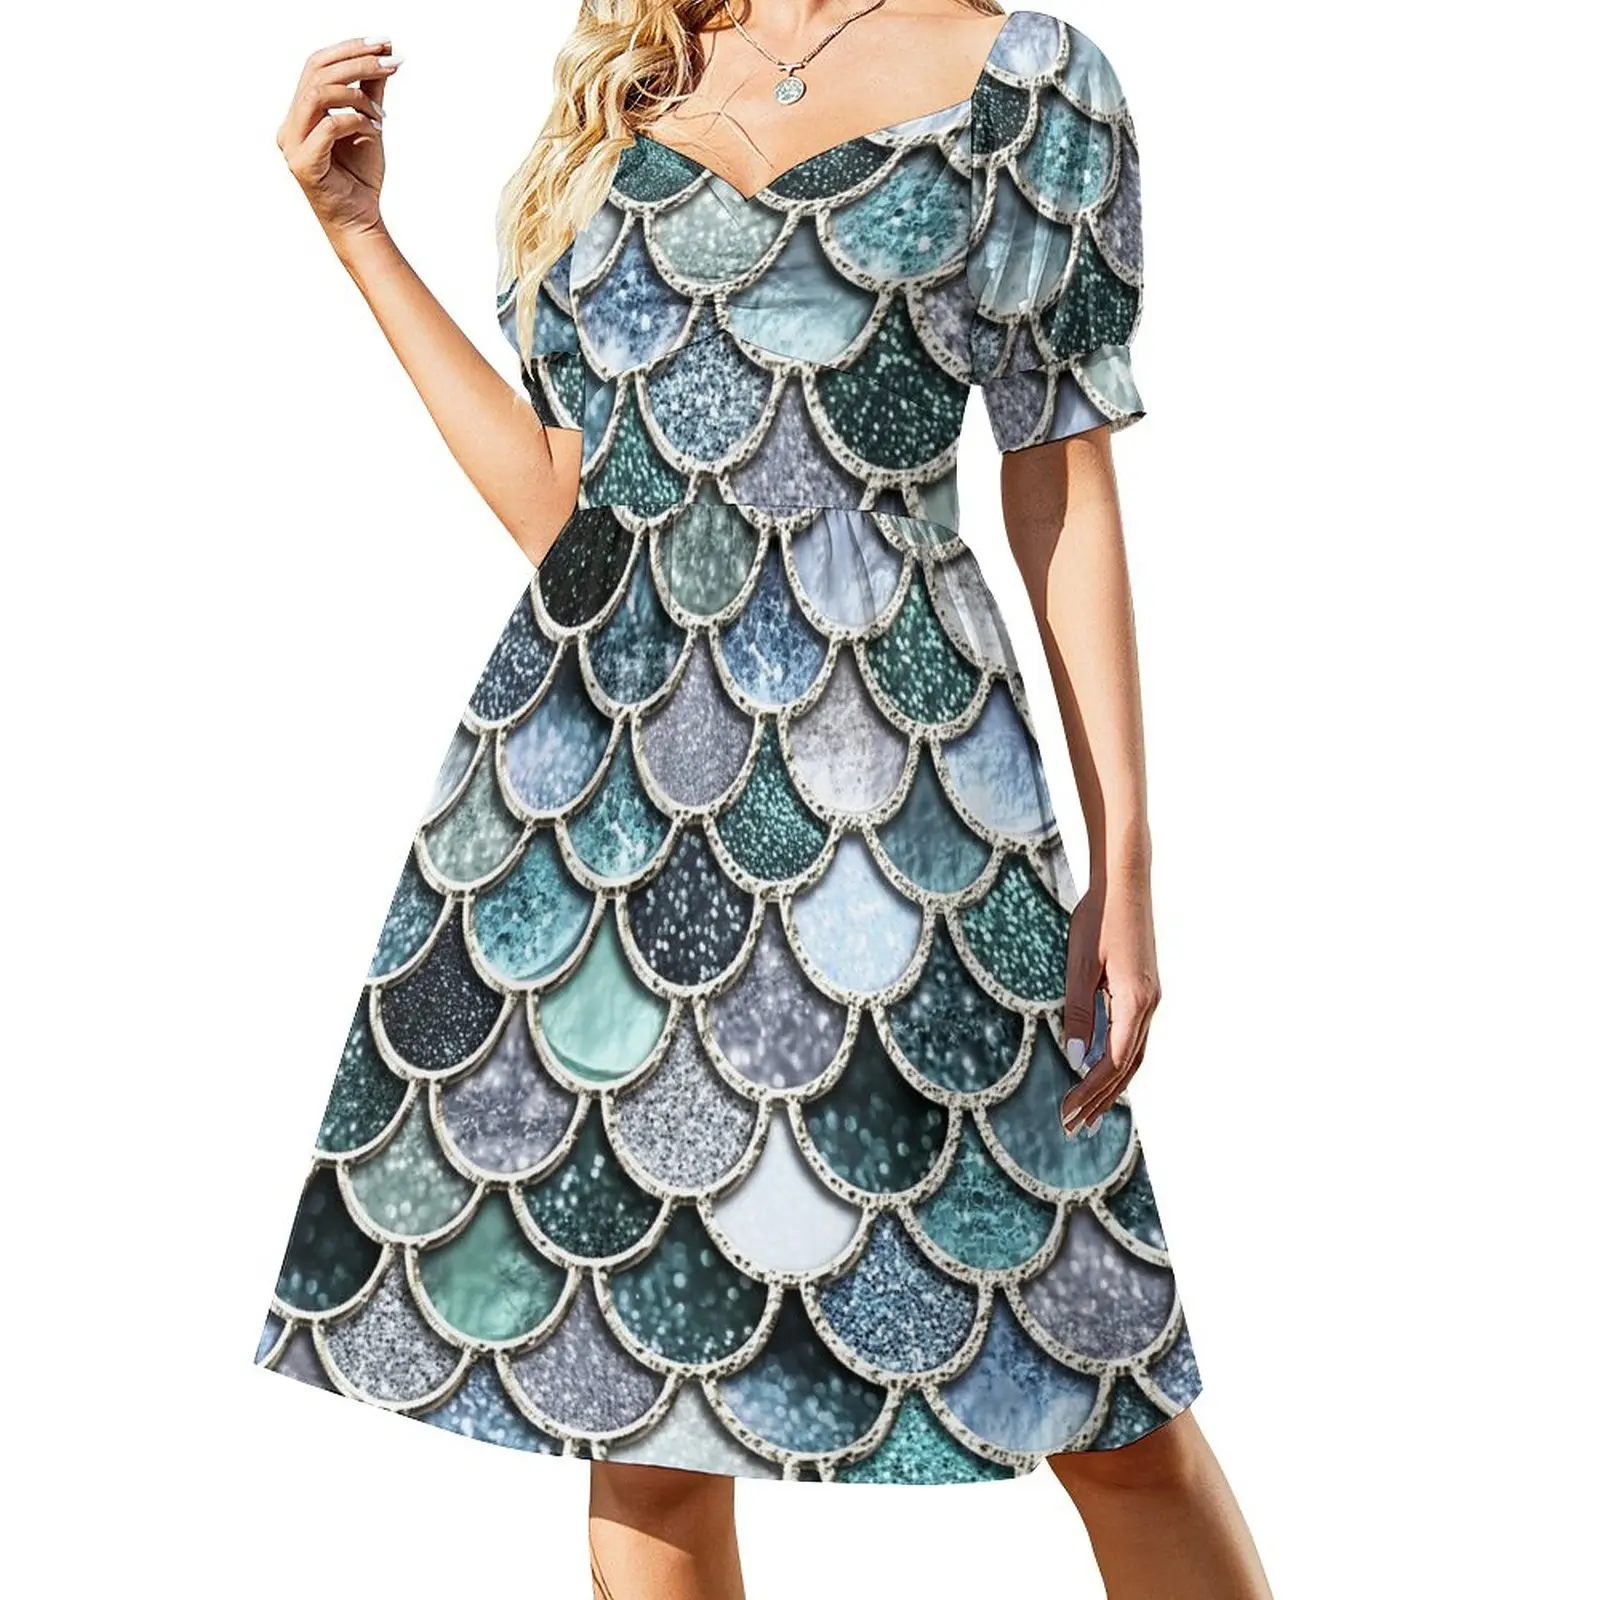 

Teal, Silver and Green Sparkle Faux Glitter Mermaid Scales Sleeveless Dress Womens dresses chic and elegant woman dress